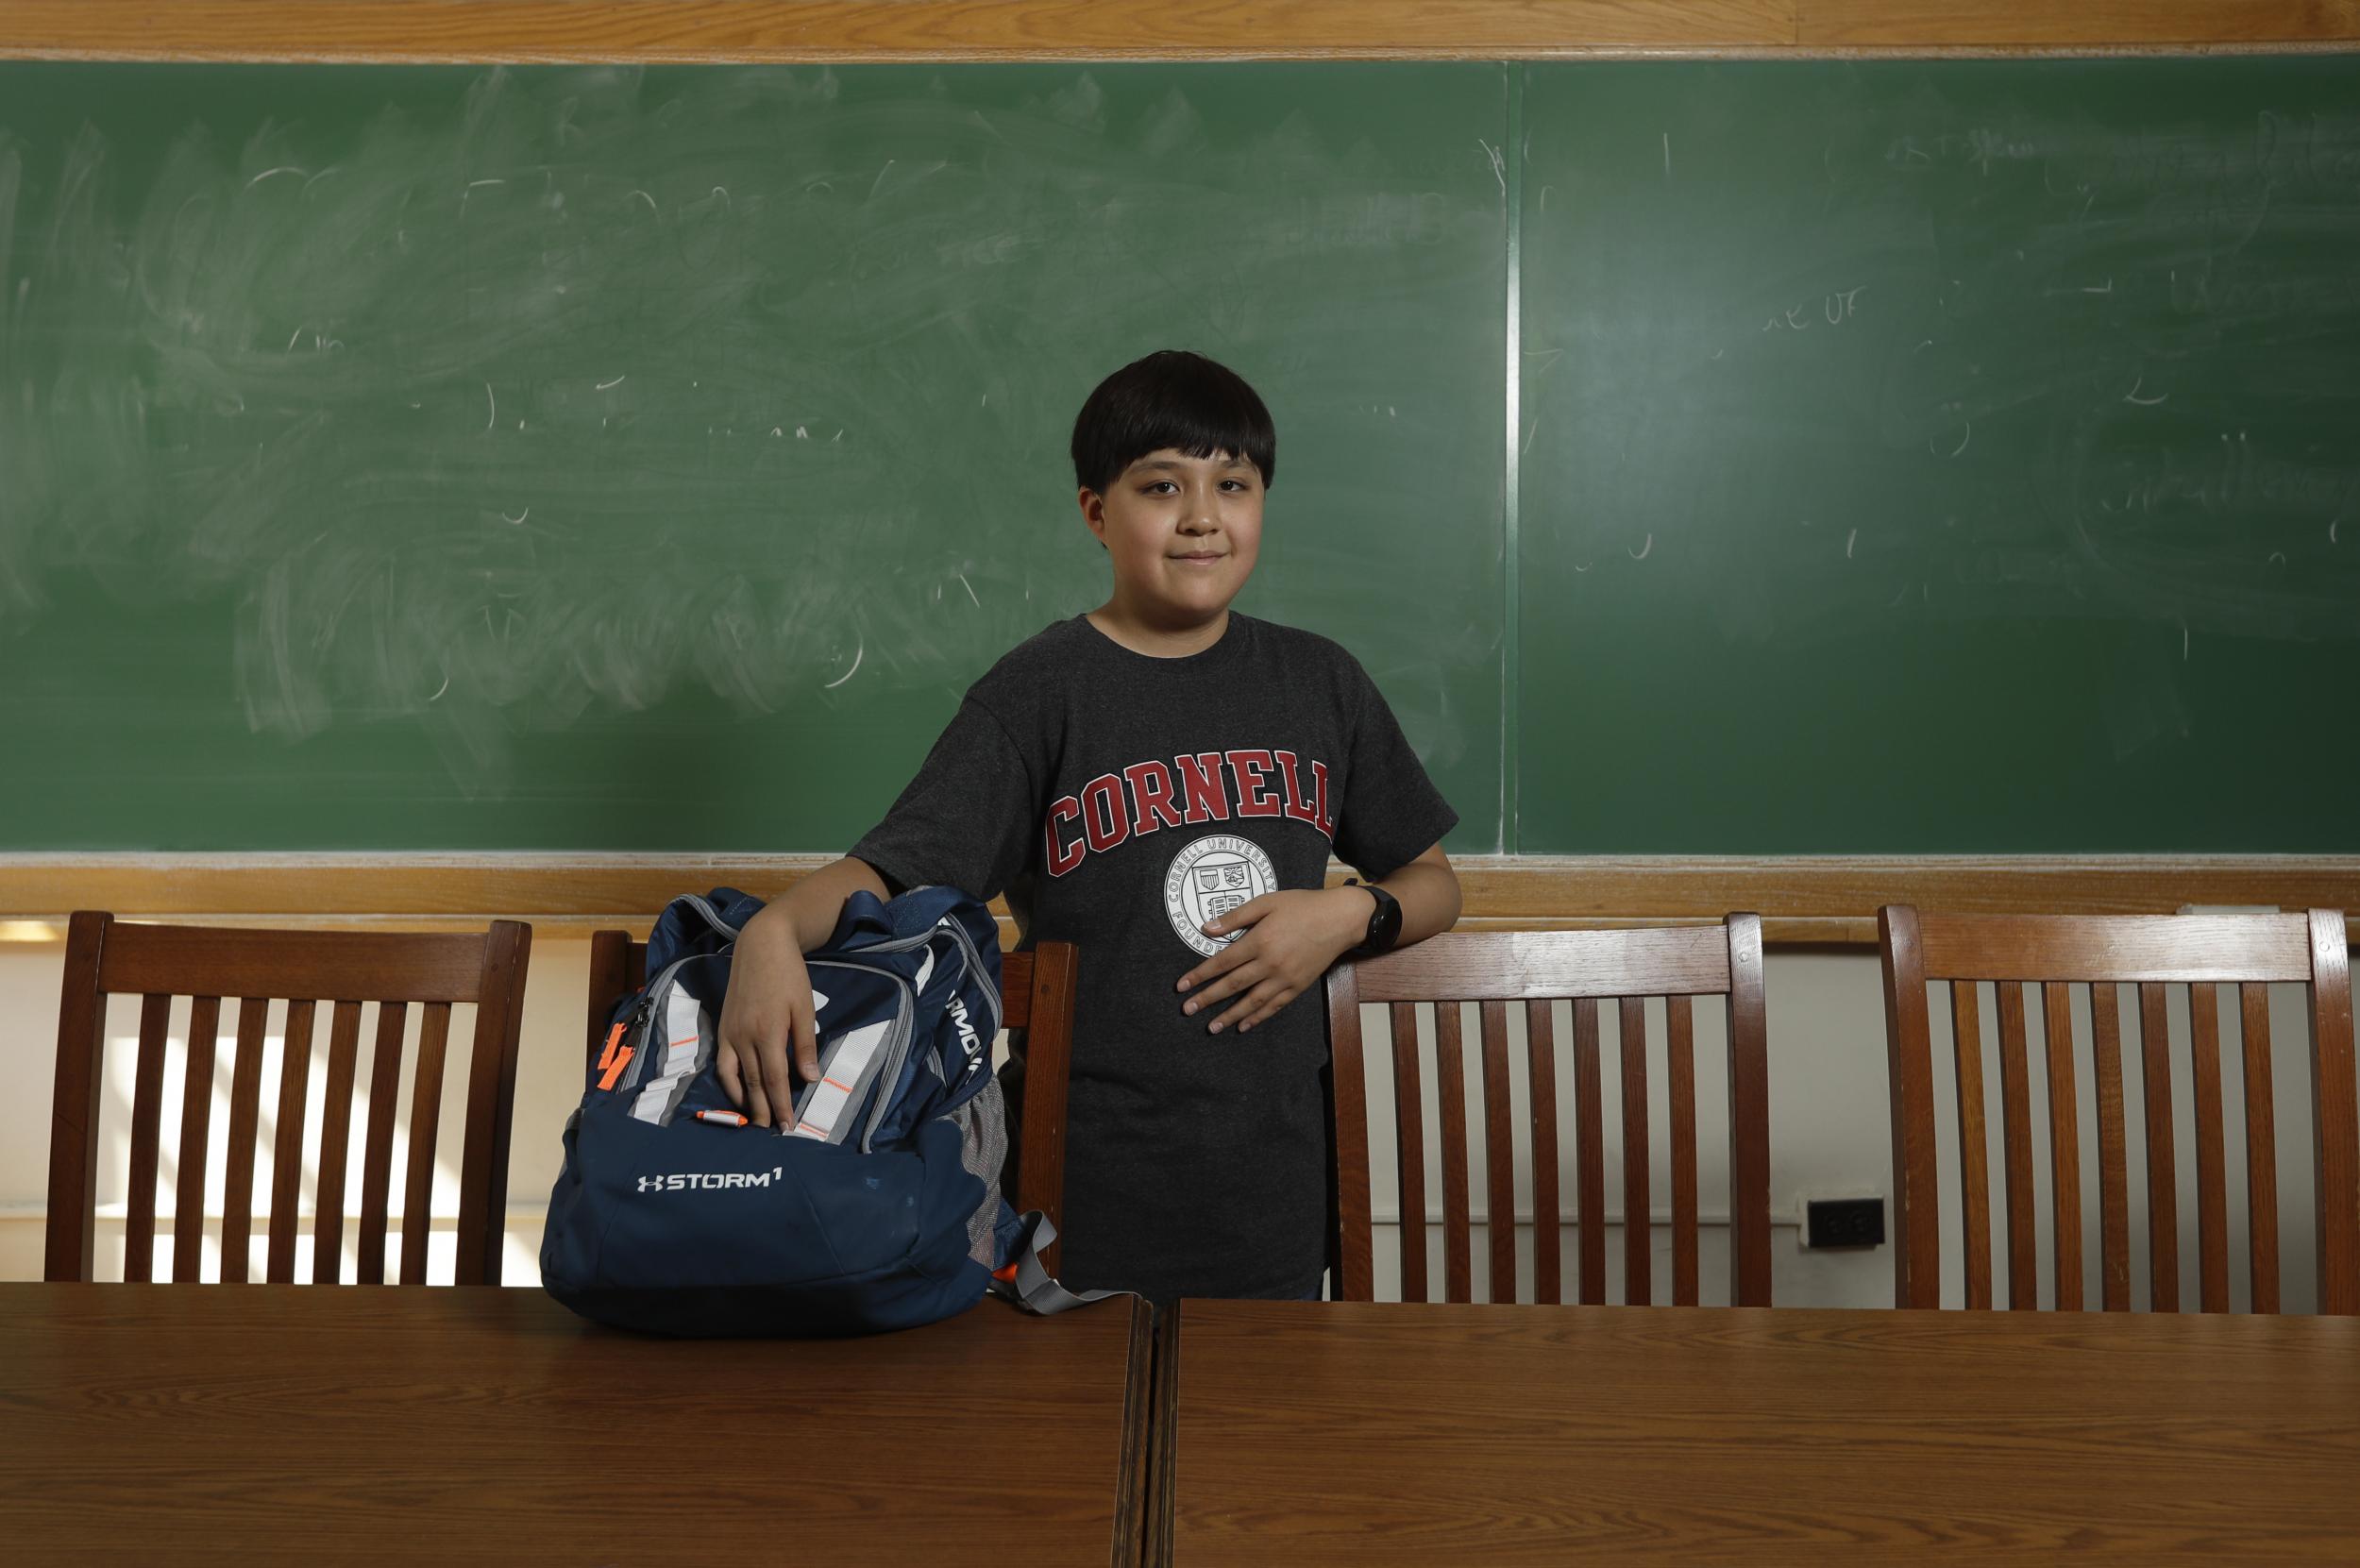 Jeremy Shuler is the youngest student to enroll at Cornell University